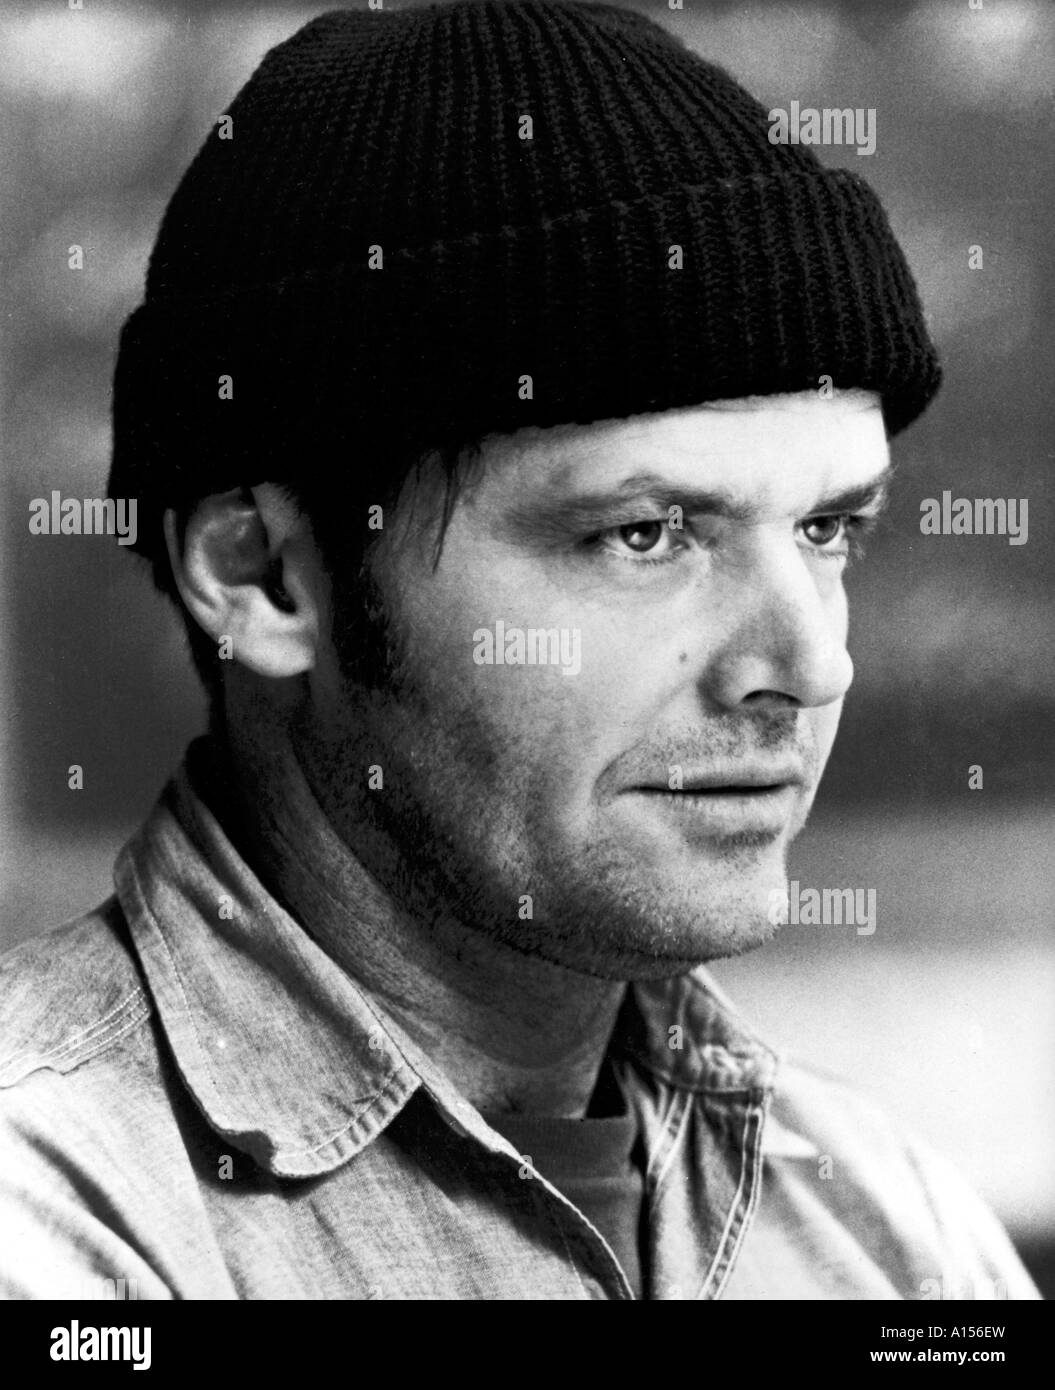 One Flew Over The Cuckoo s Nest Year 1975 Director Milos Forman Jack Nicholson Based upon Ken Kesey s book Stock Photo